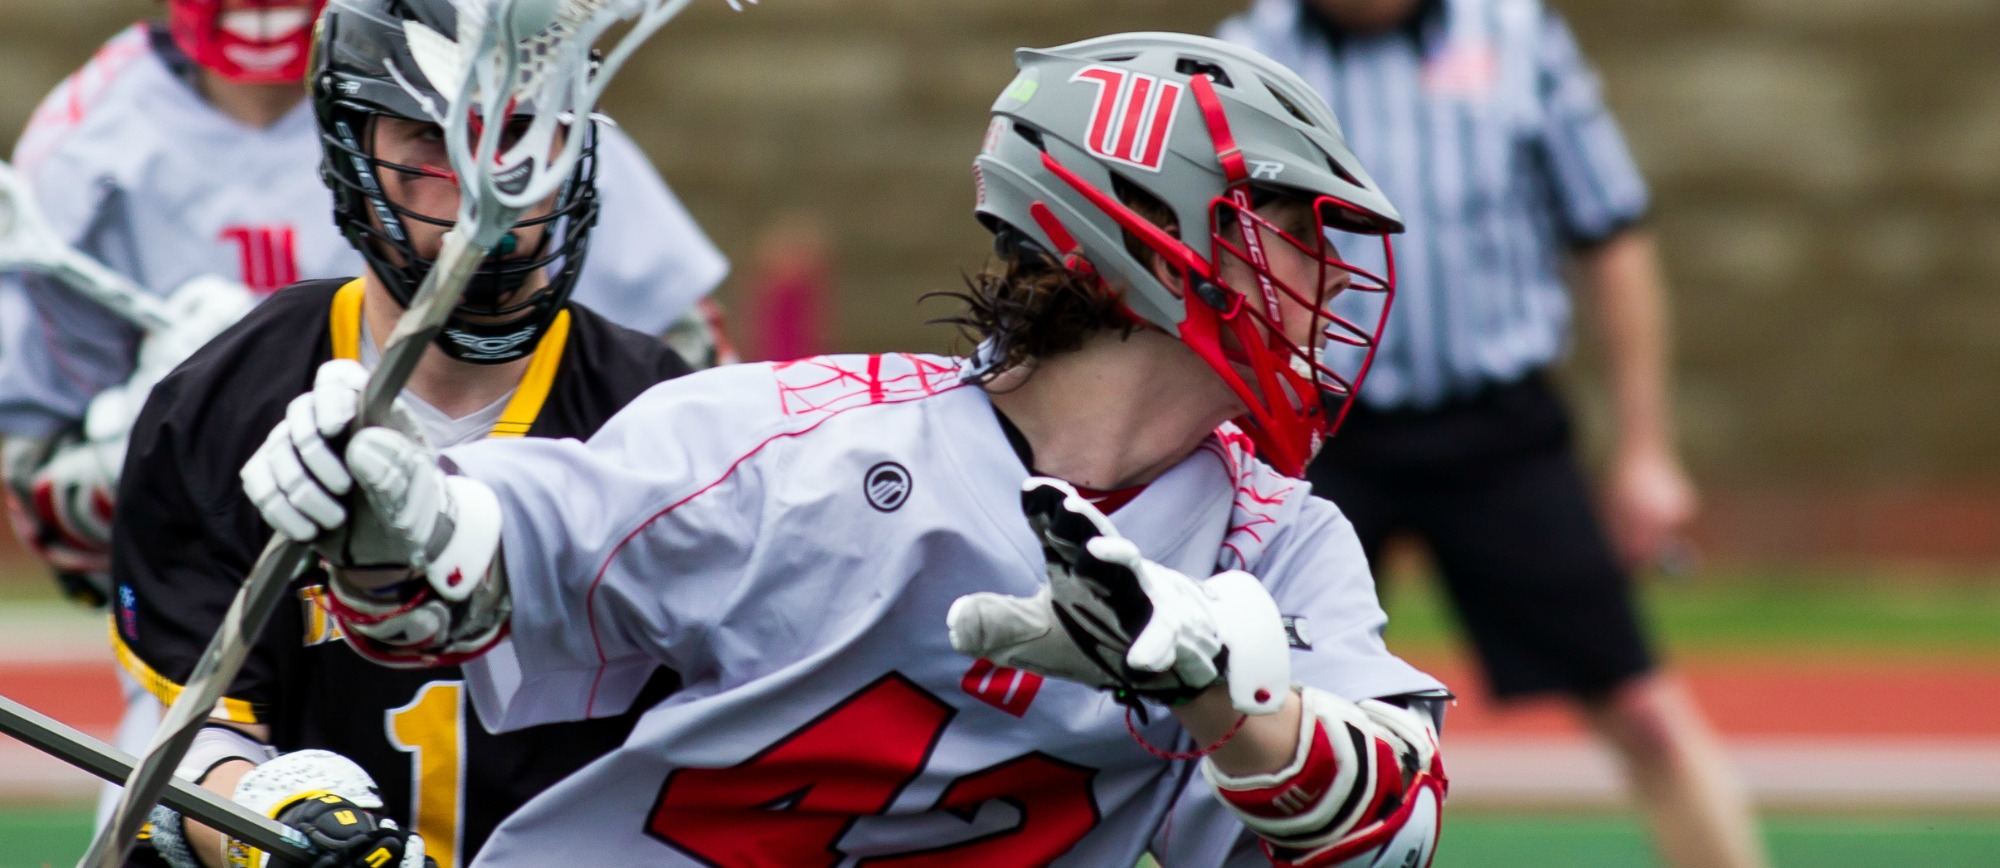 Men's Lacrosse Cruises Past DePauw as Fuss Twins Chase Down History